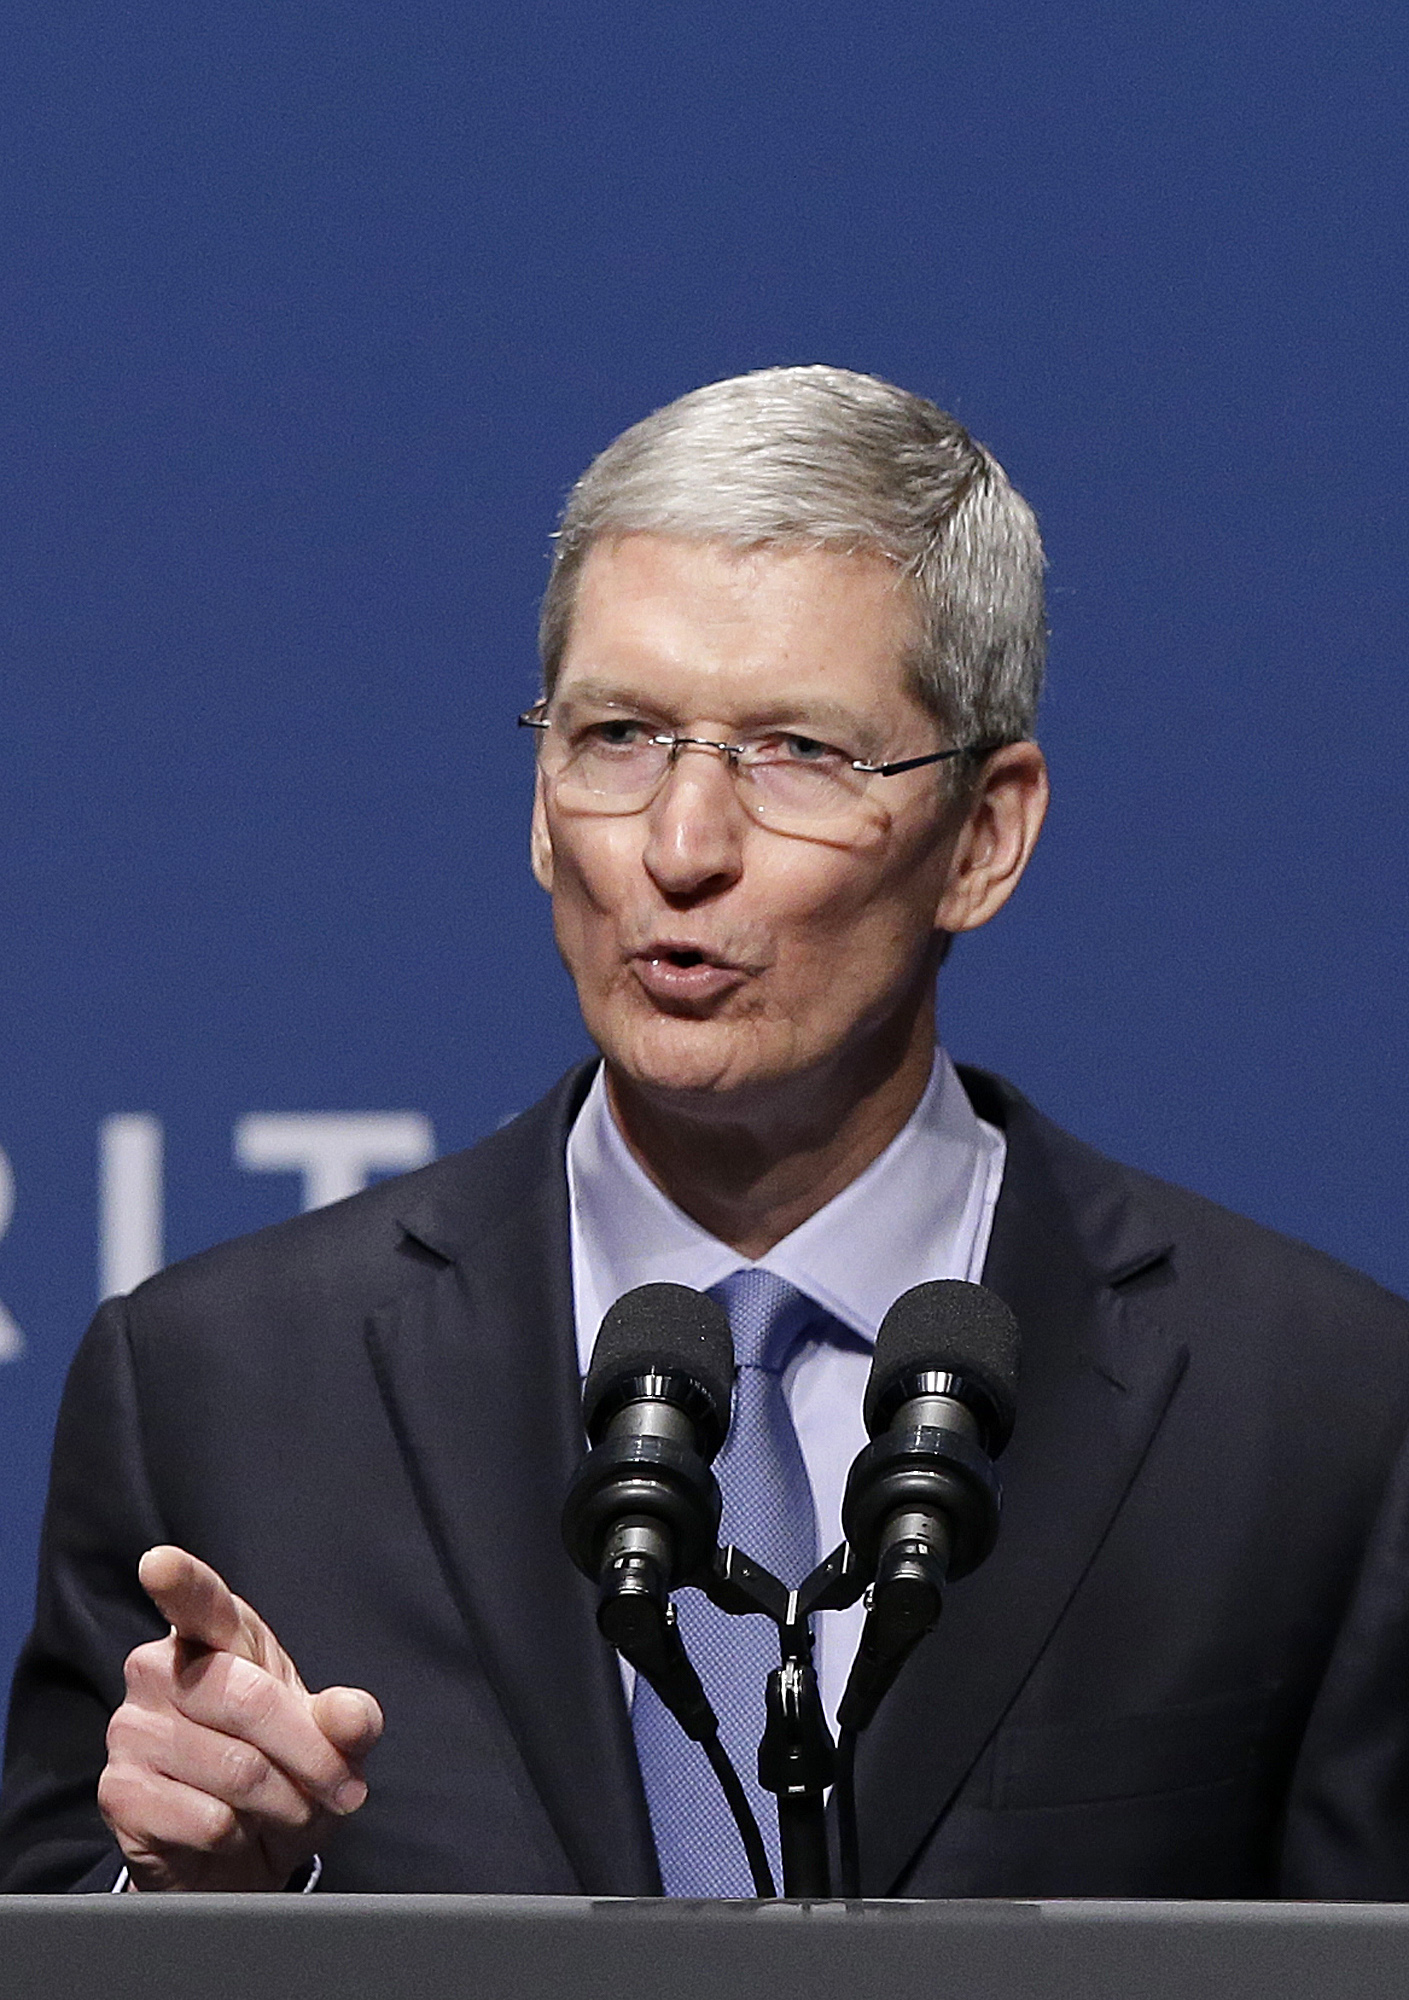 Apple CEO Tim Cook speaks at the White House Summit on Cybersecurity and Consumer Protection in Stanford, Calif. on Feb. 13, 2015.